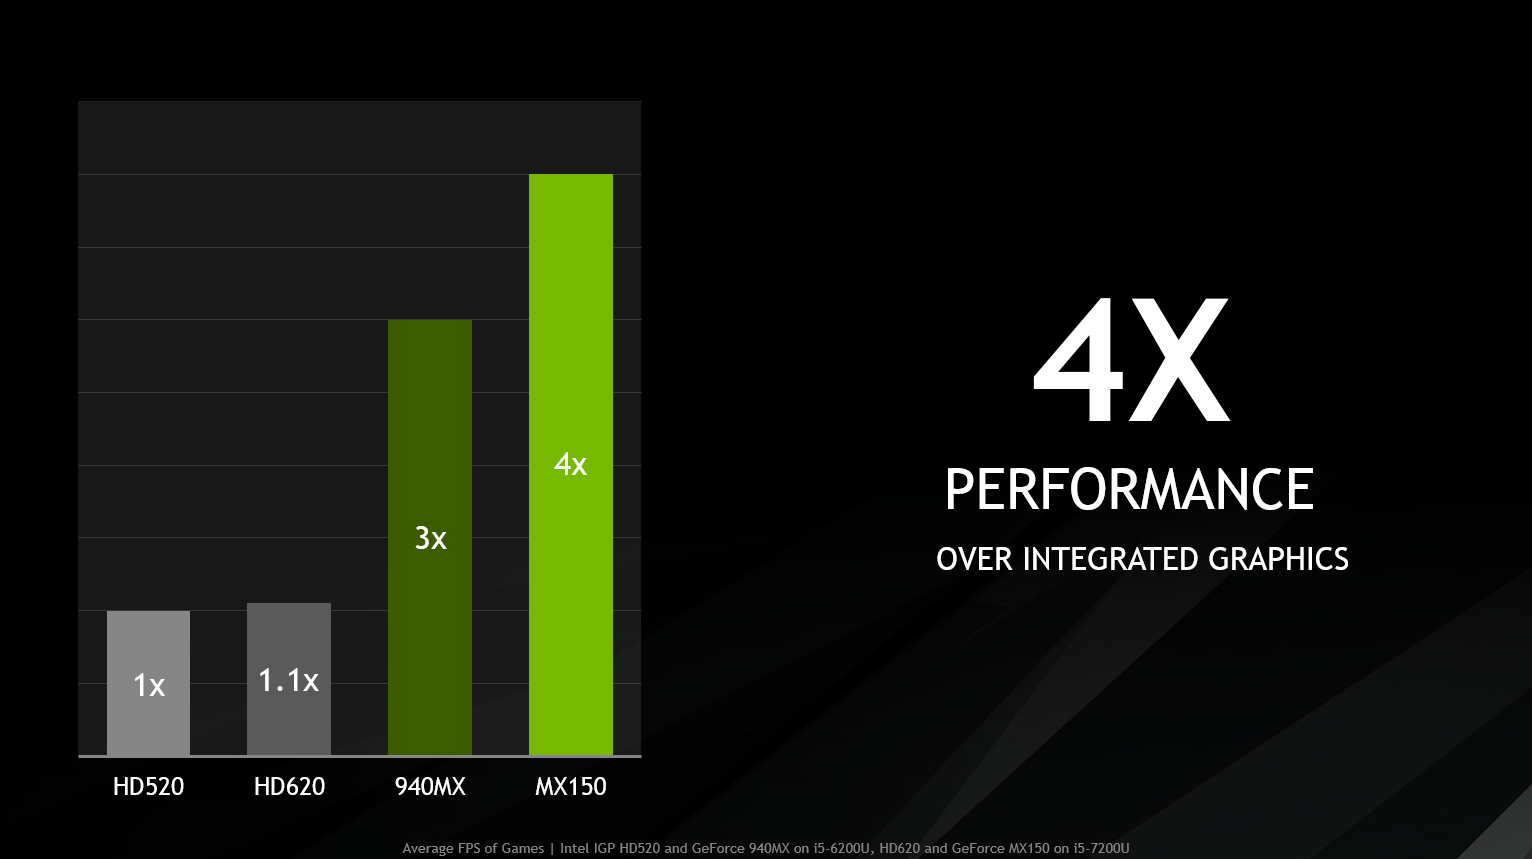 Introducing Geforce Mx150 Laptops Supercharged For Work And Play